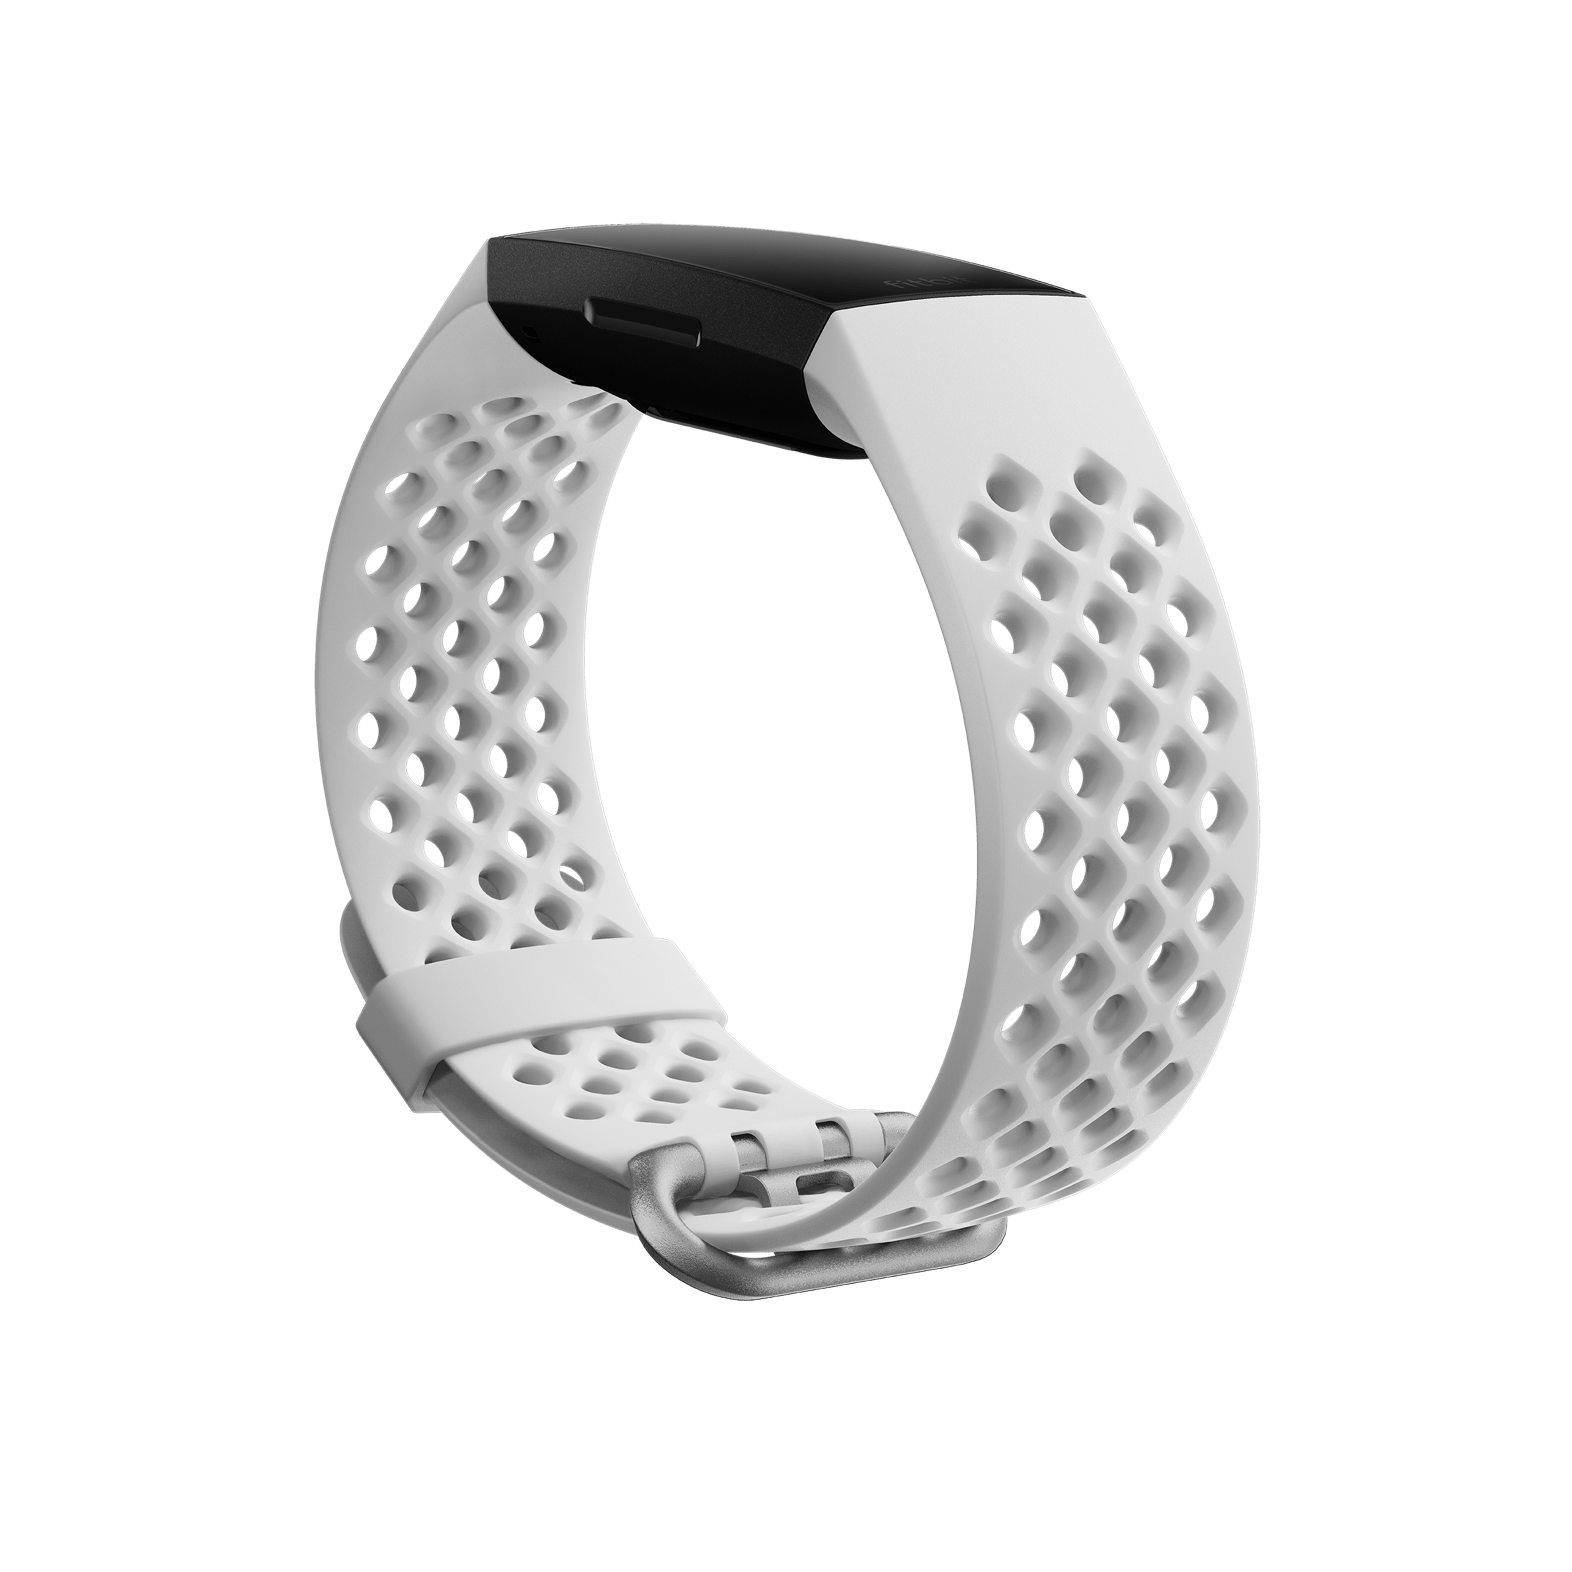 fitbit charge 3 hypoallergenic band